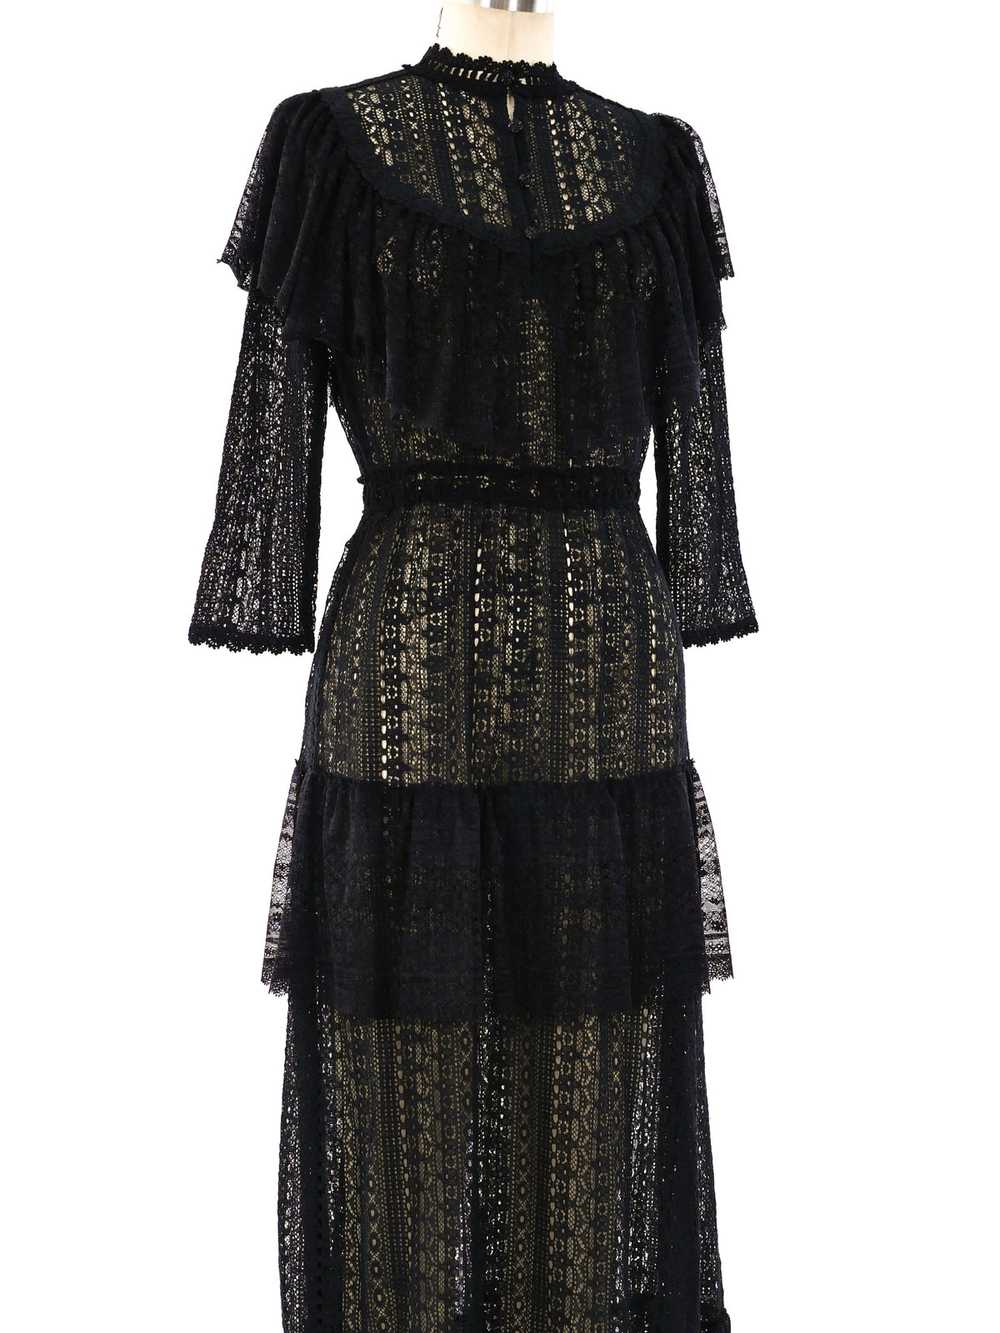 Black Tiered Lace Maxi Dress - image 5